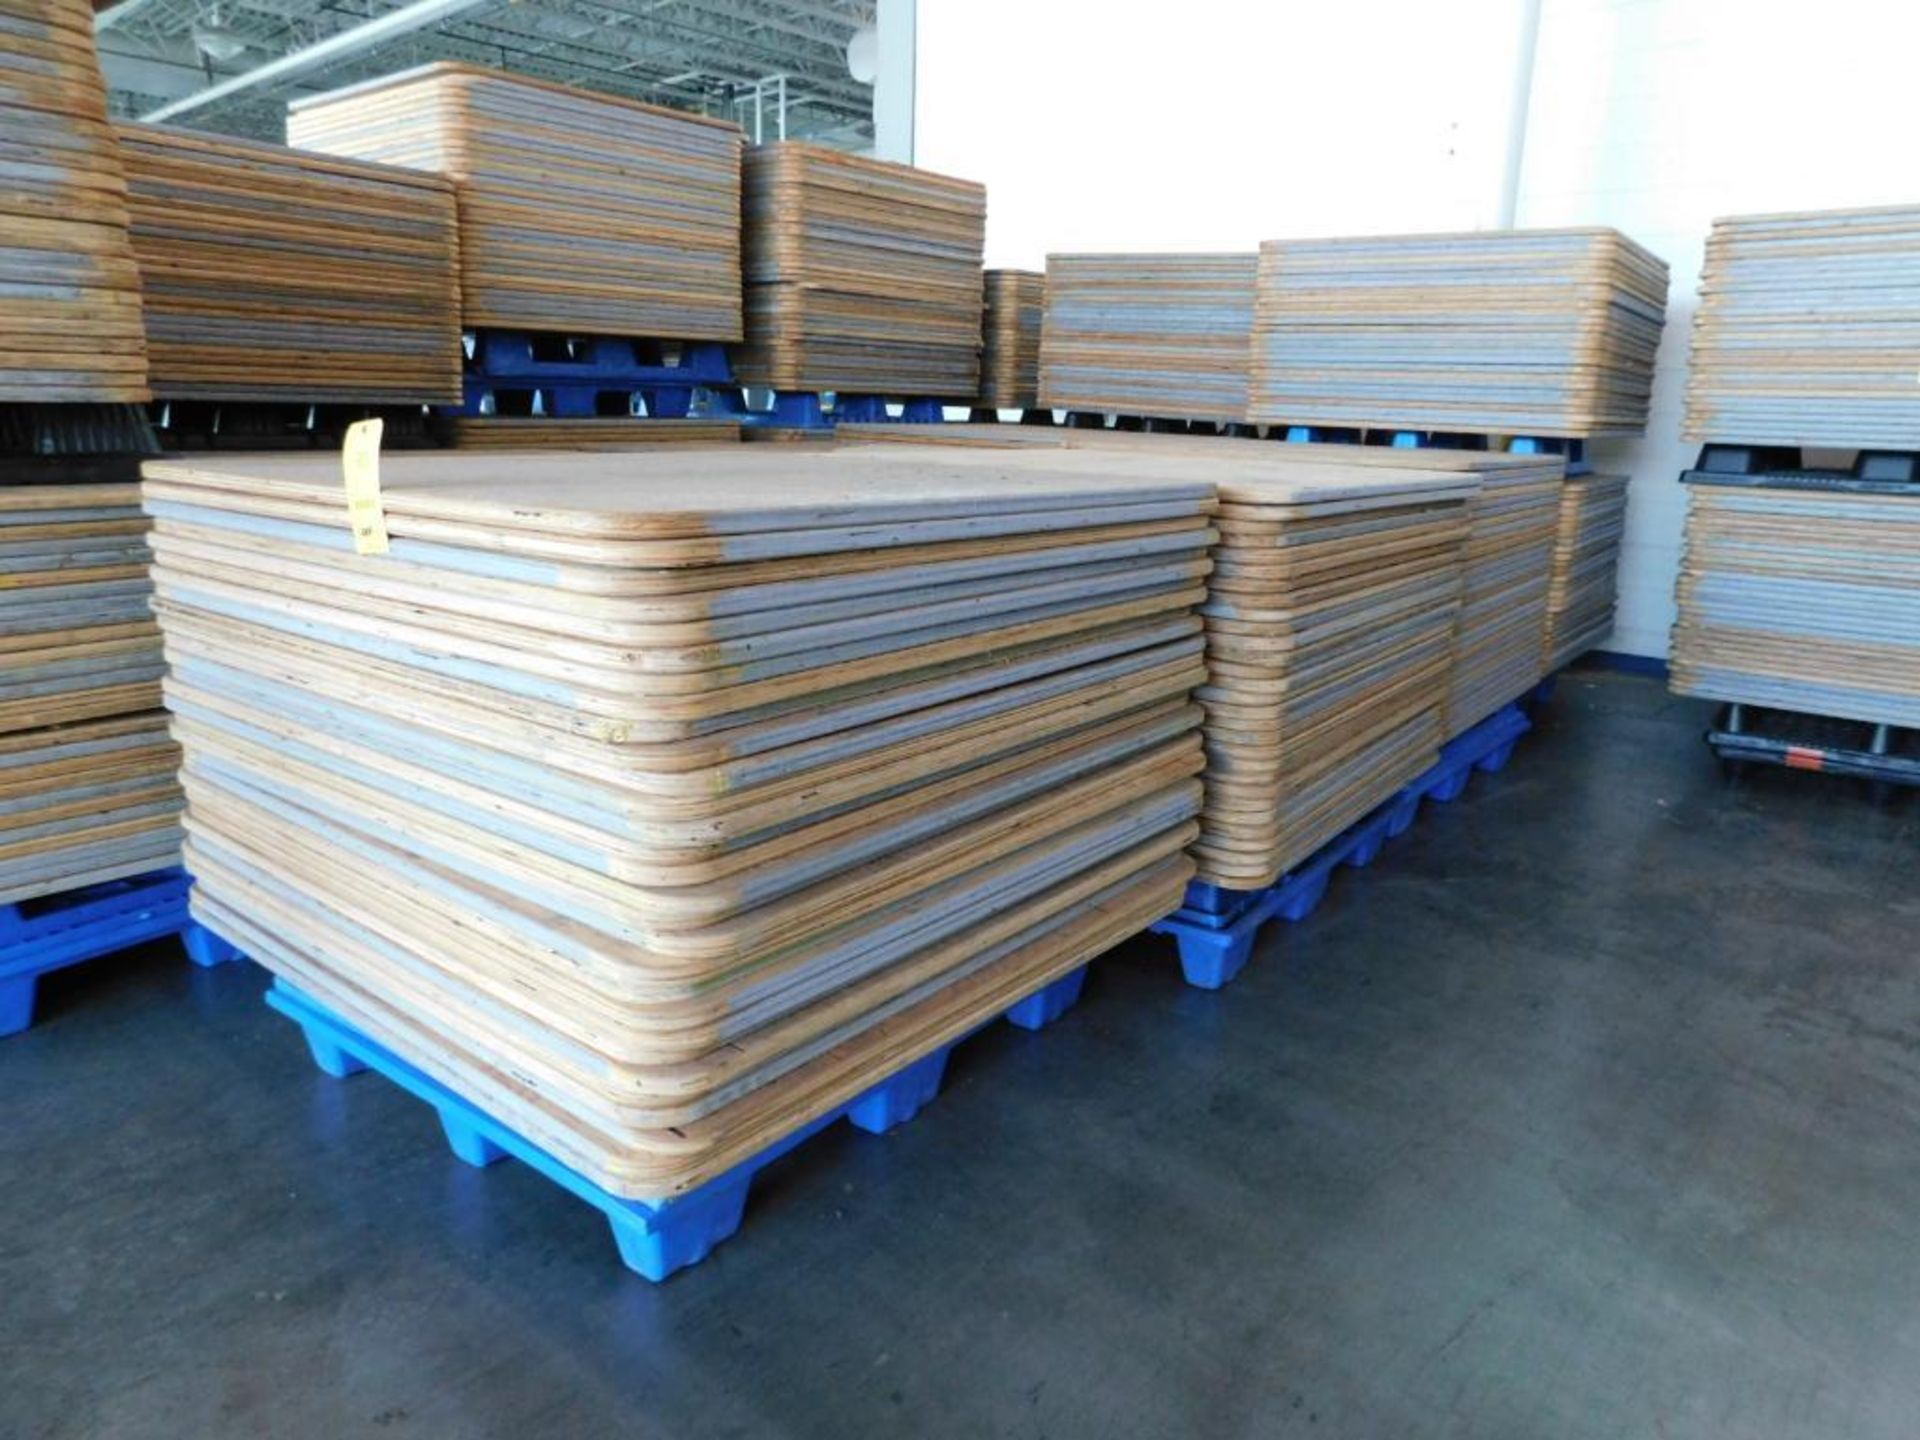 LOT: Large Quantity of 50" x 50" Wood Paper Roll Pallets on (7) Plastic Pallets (LOCATION: IN MAIL R - Image 2 of 6